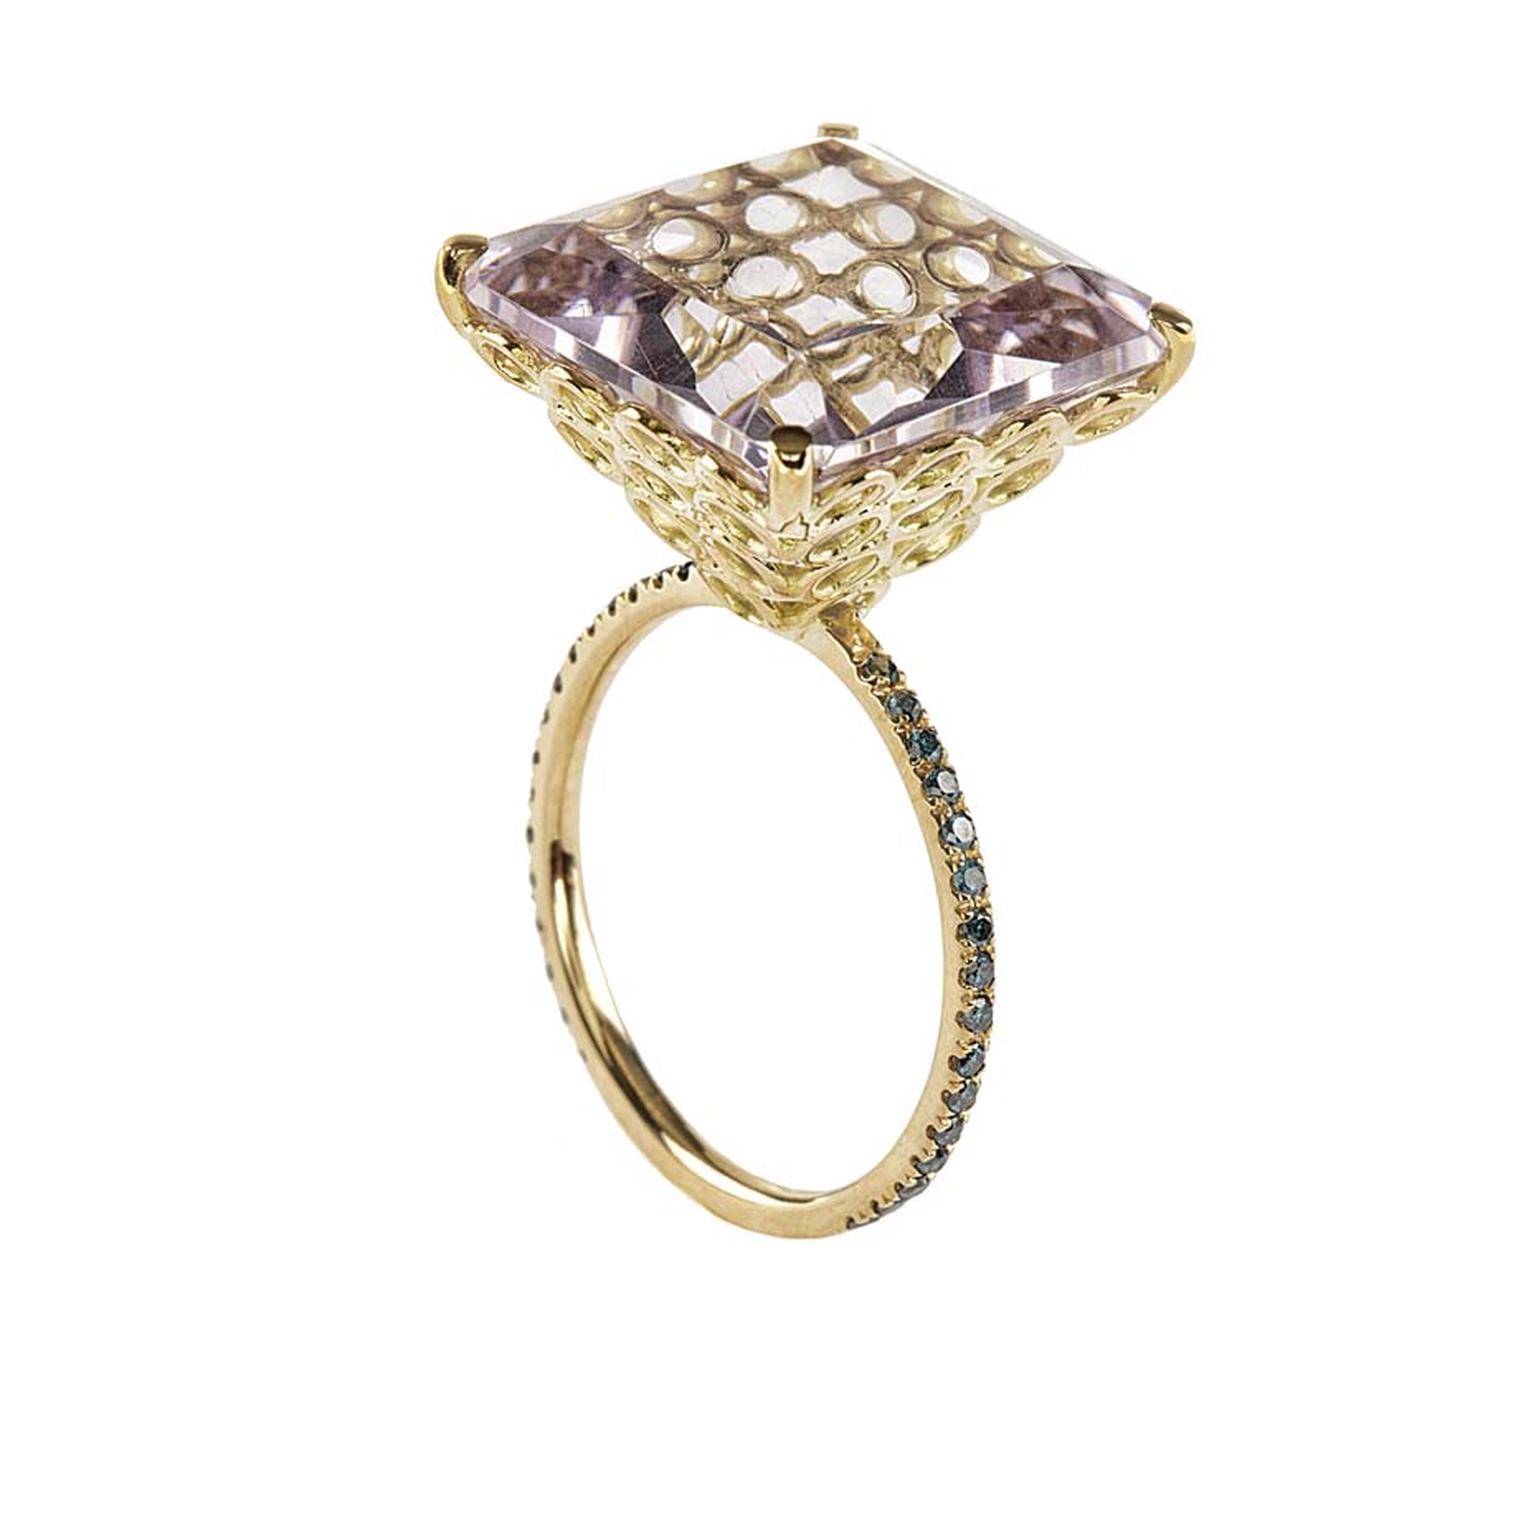 Lito yellow gold ring with a 13.6ct pink princess square-cut amethyst and blue diamonds